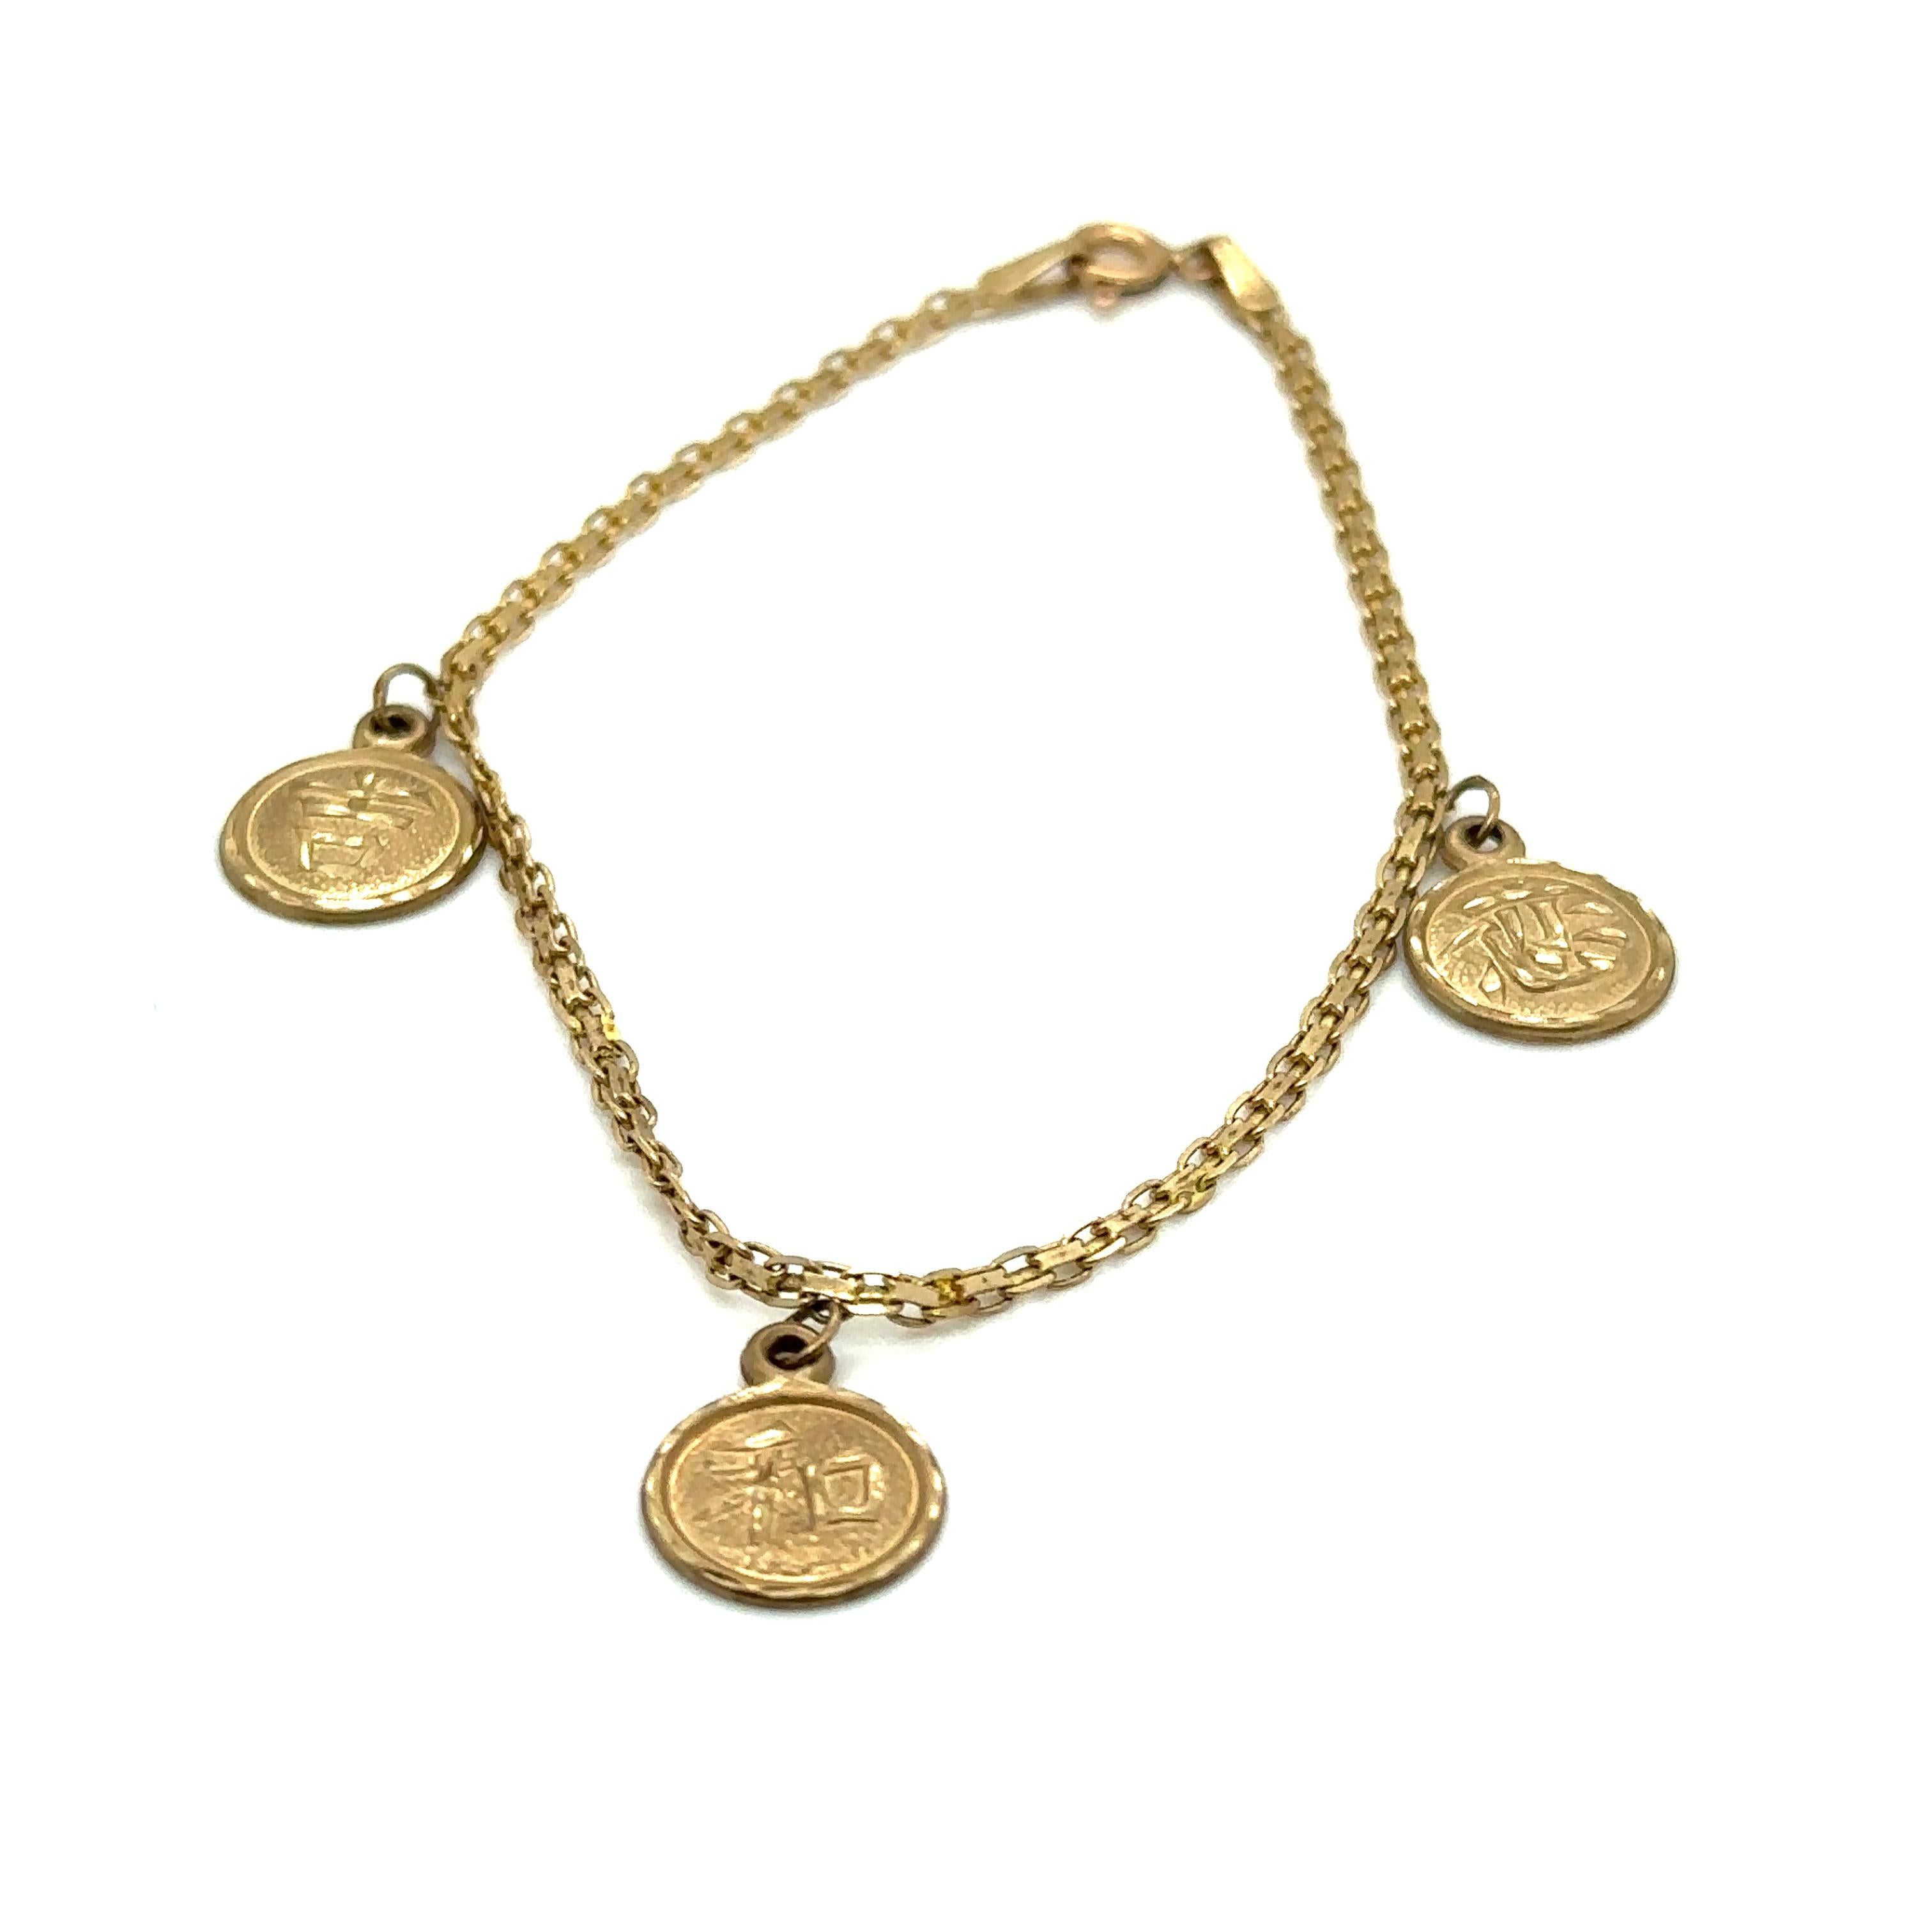 Circa 1990s Chinese Character Charm Bracelet in 10 Karat Gold For Sale 4